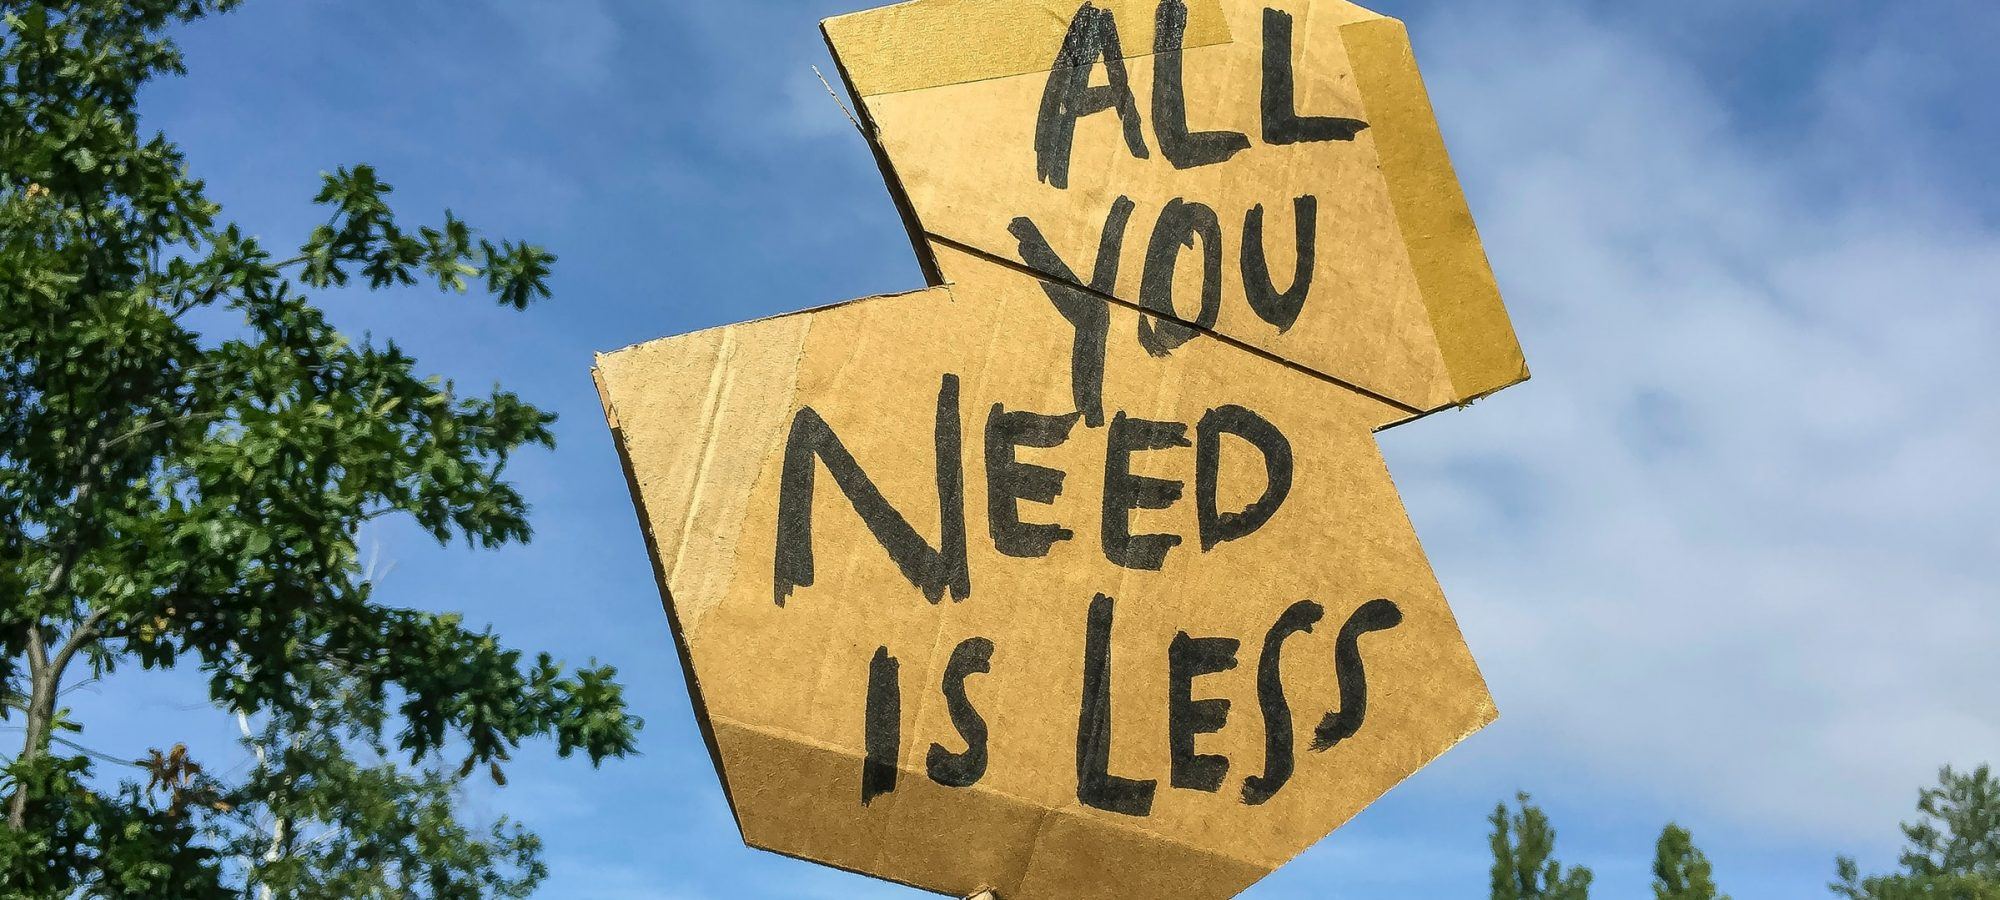 etienne-girardet-climate-change-all-you-need-is-less-sign-covid-great-reset-cropped-2000x900